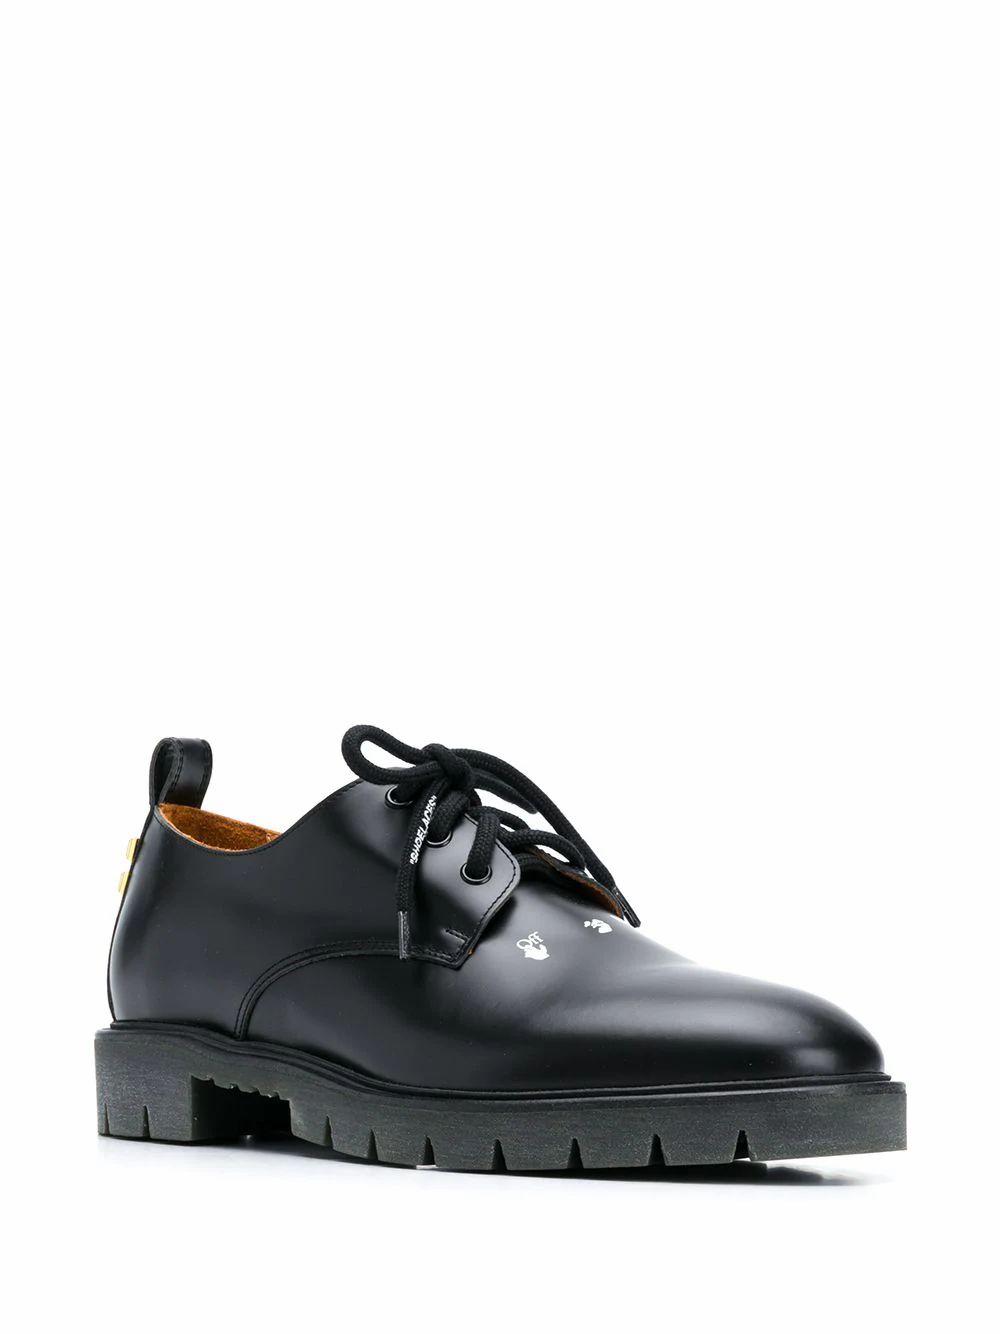 Off-White c/o Virgil Abloh Leather Derby Shoes in Black for Men Mens Shoes Lace-ups Derby shoes 